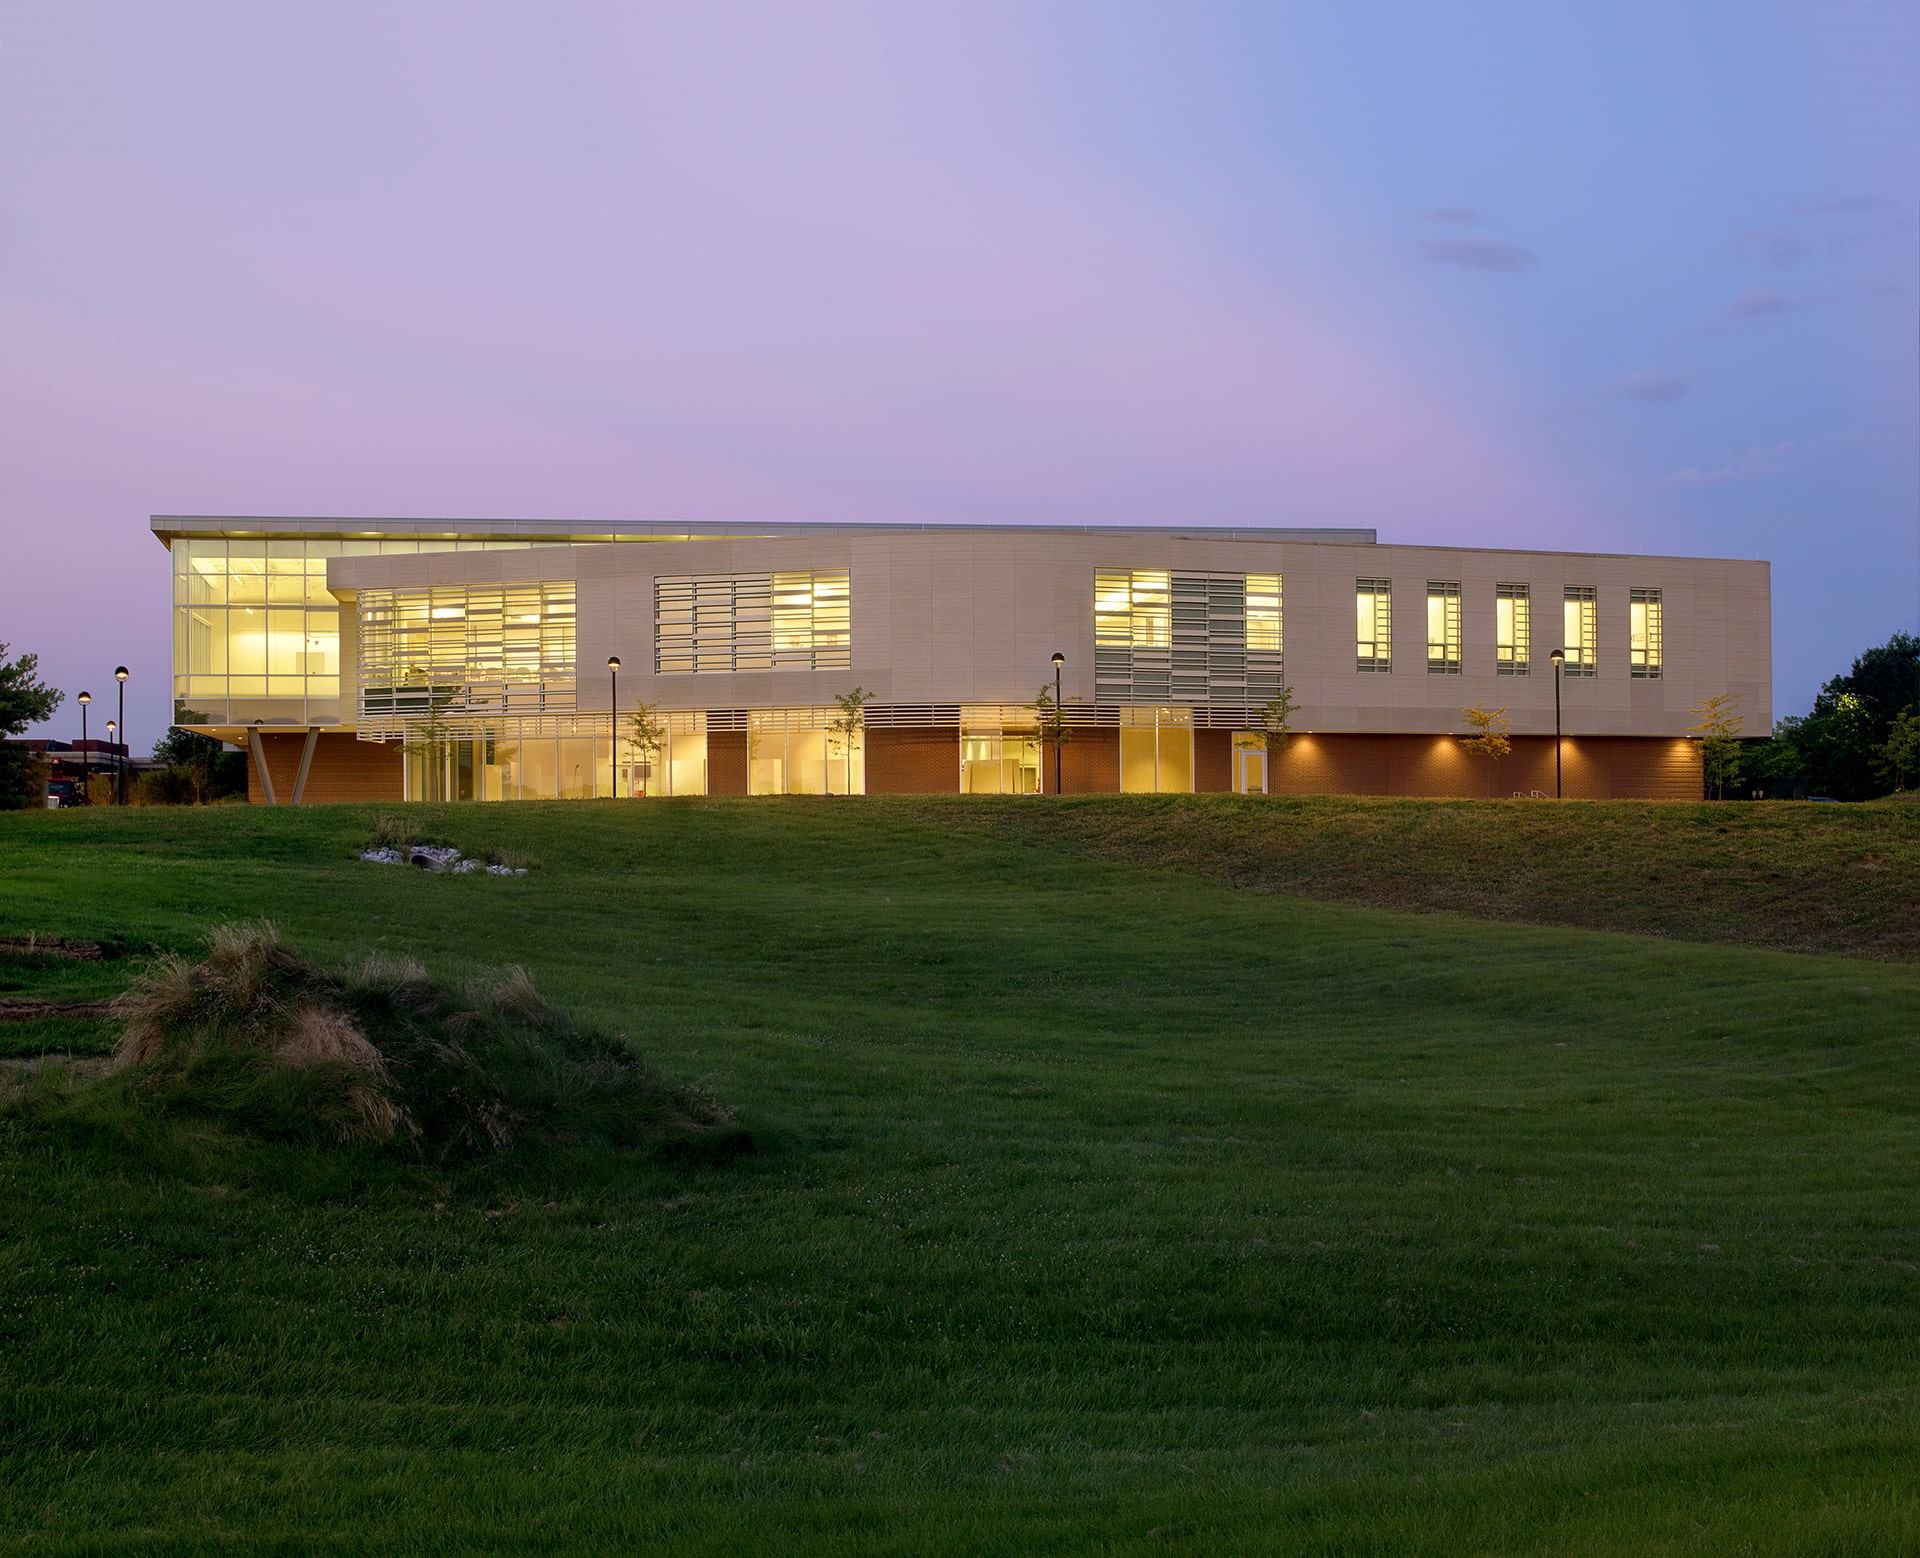 exterior of southern illinois university art and design building designed by trivers architectural firm